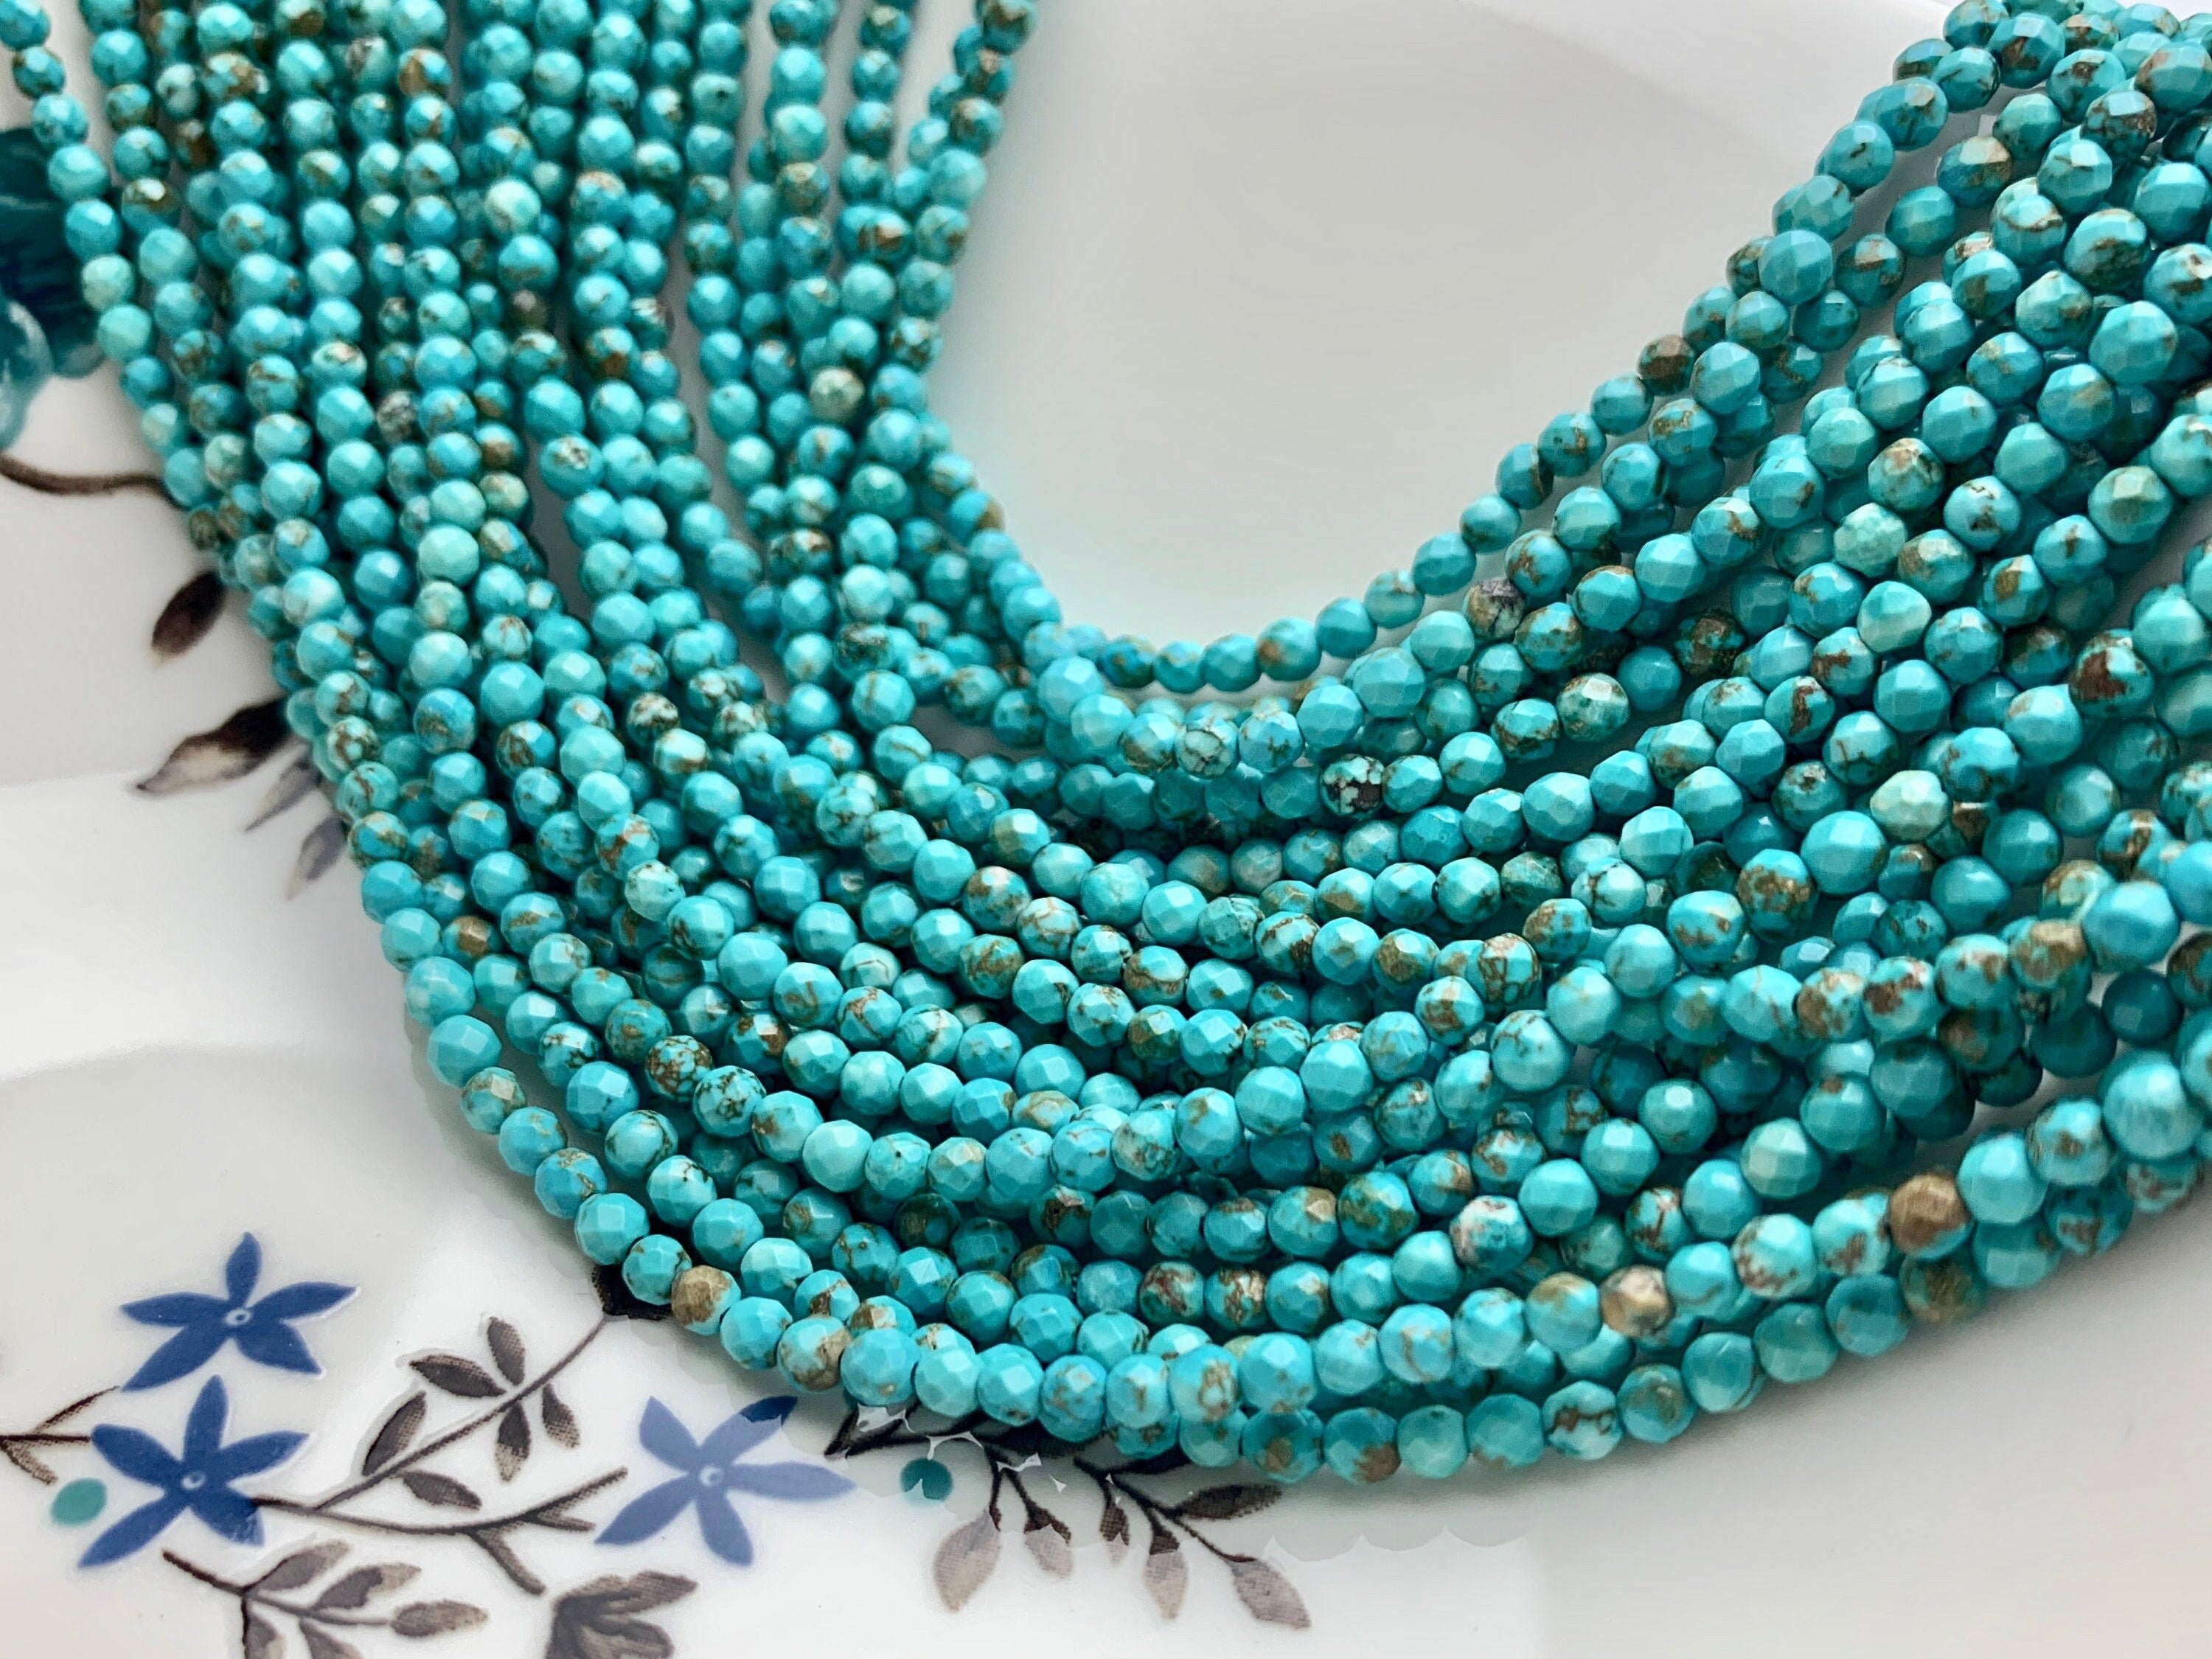 Wholesale Natural Stone Beads Blue Turquoise Round Loose Beads For